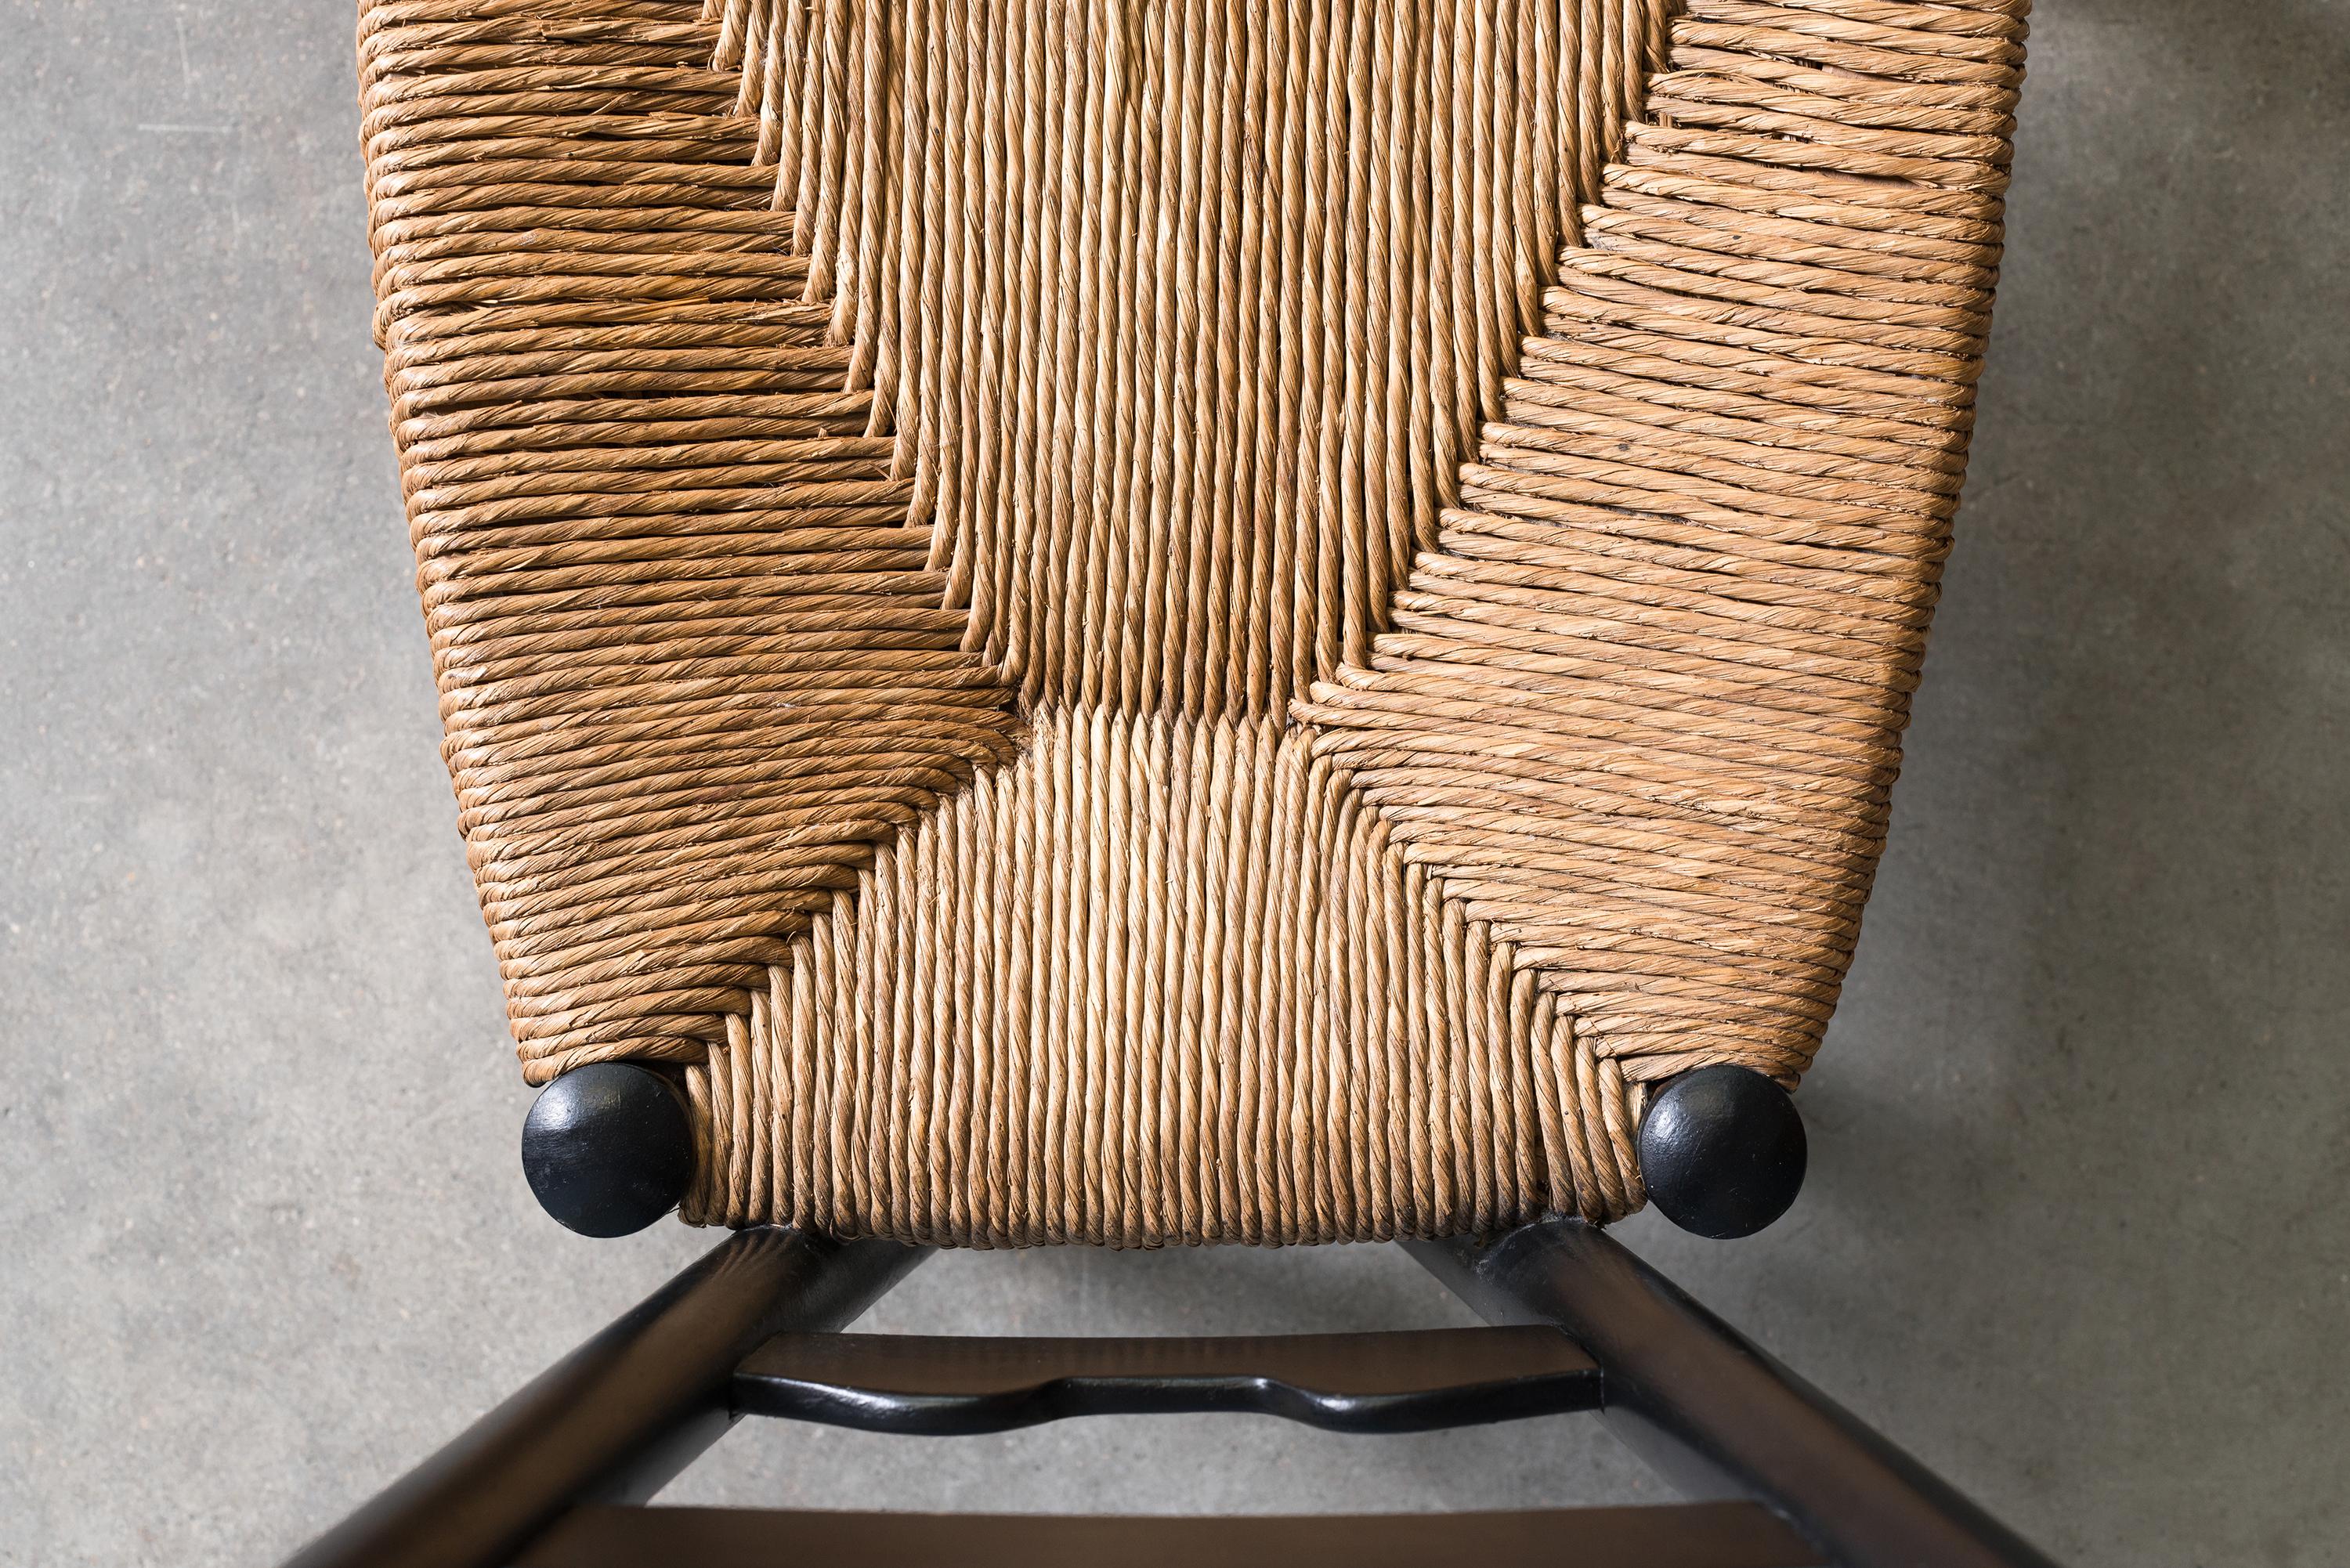 Wicker Pair of Fireside Chairs by Gio Ponti, circa 1939